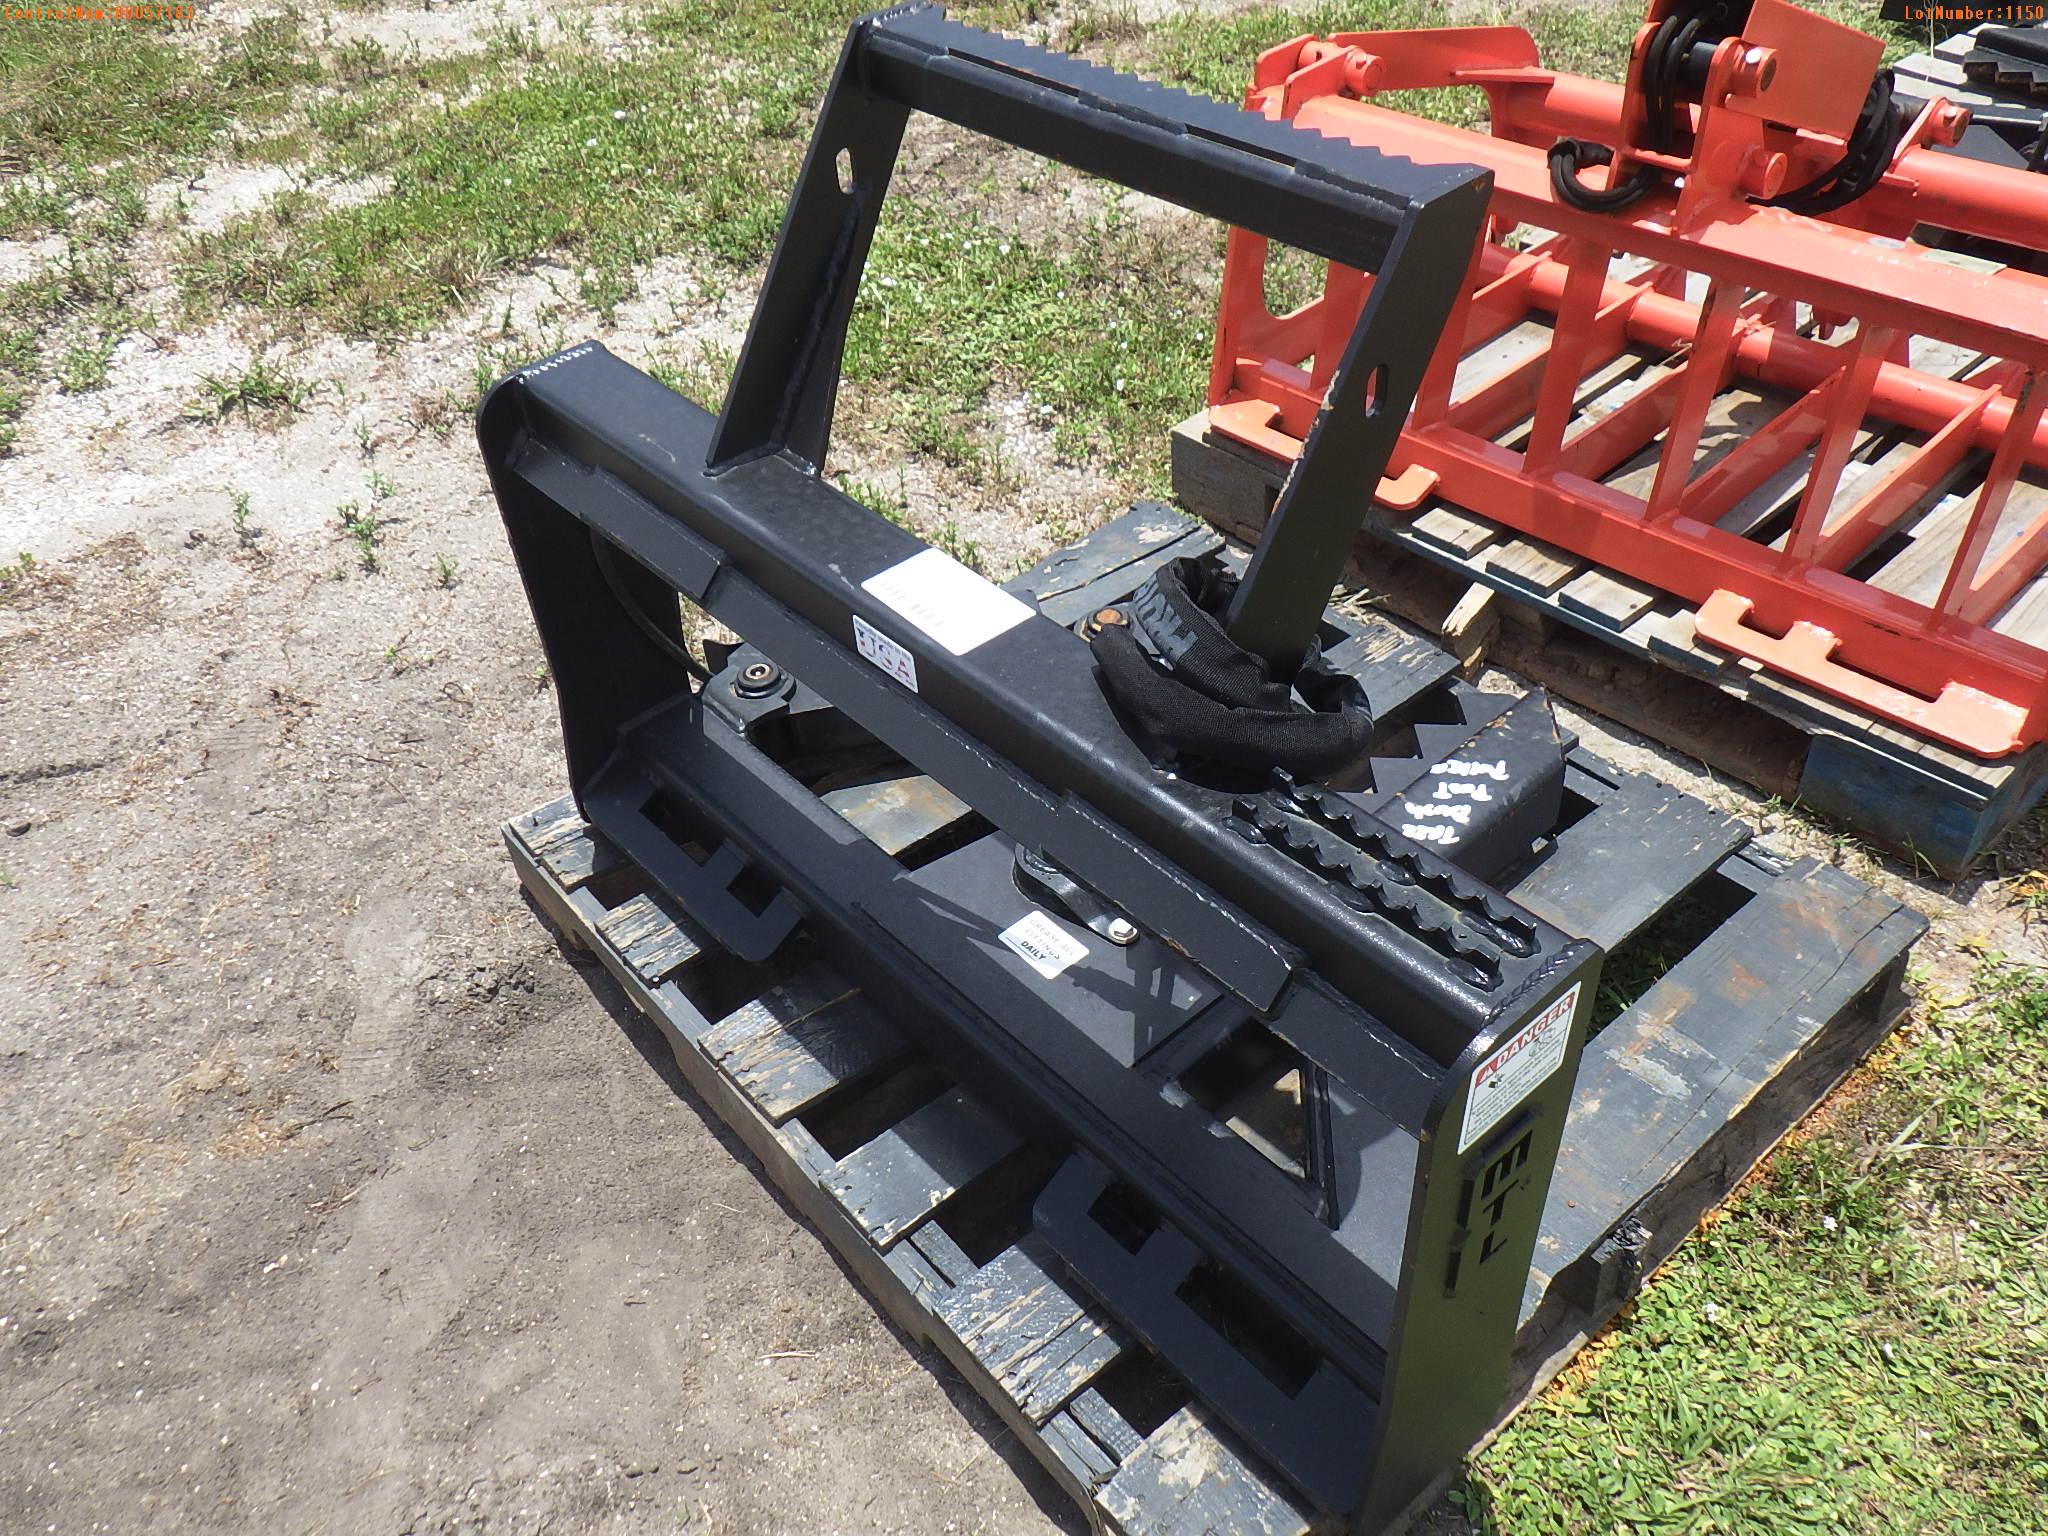 8-01150 (Equip.-Implement Farm)  Seller:Private/Dealer QUICK CONNECT TREE PULLER